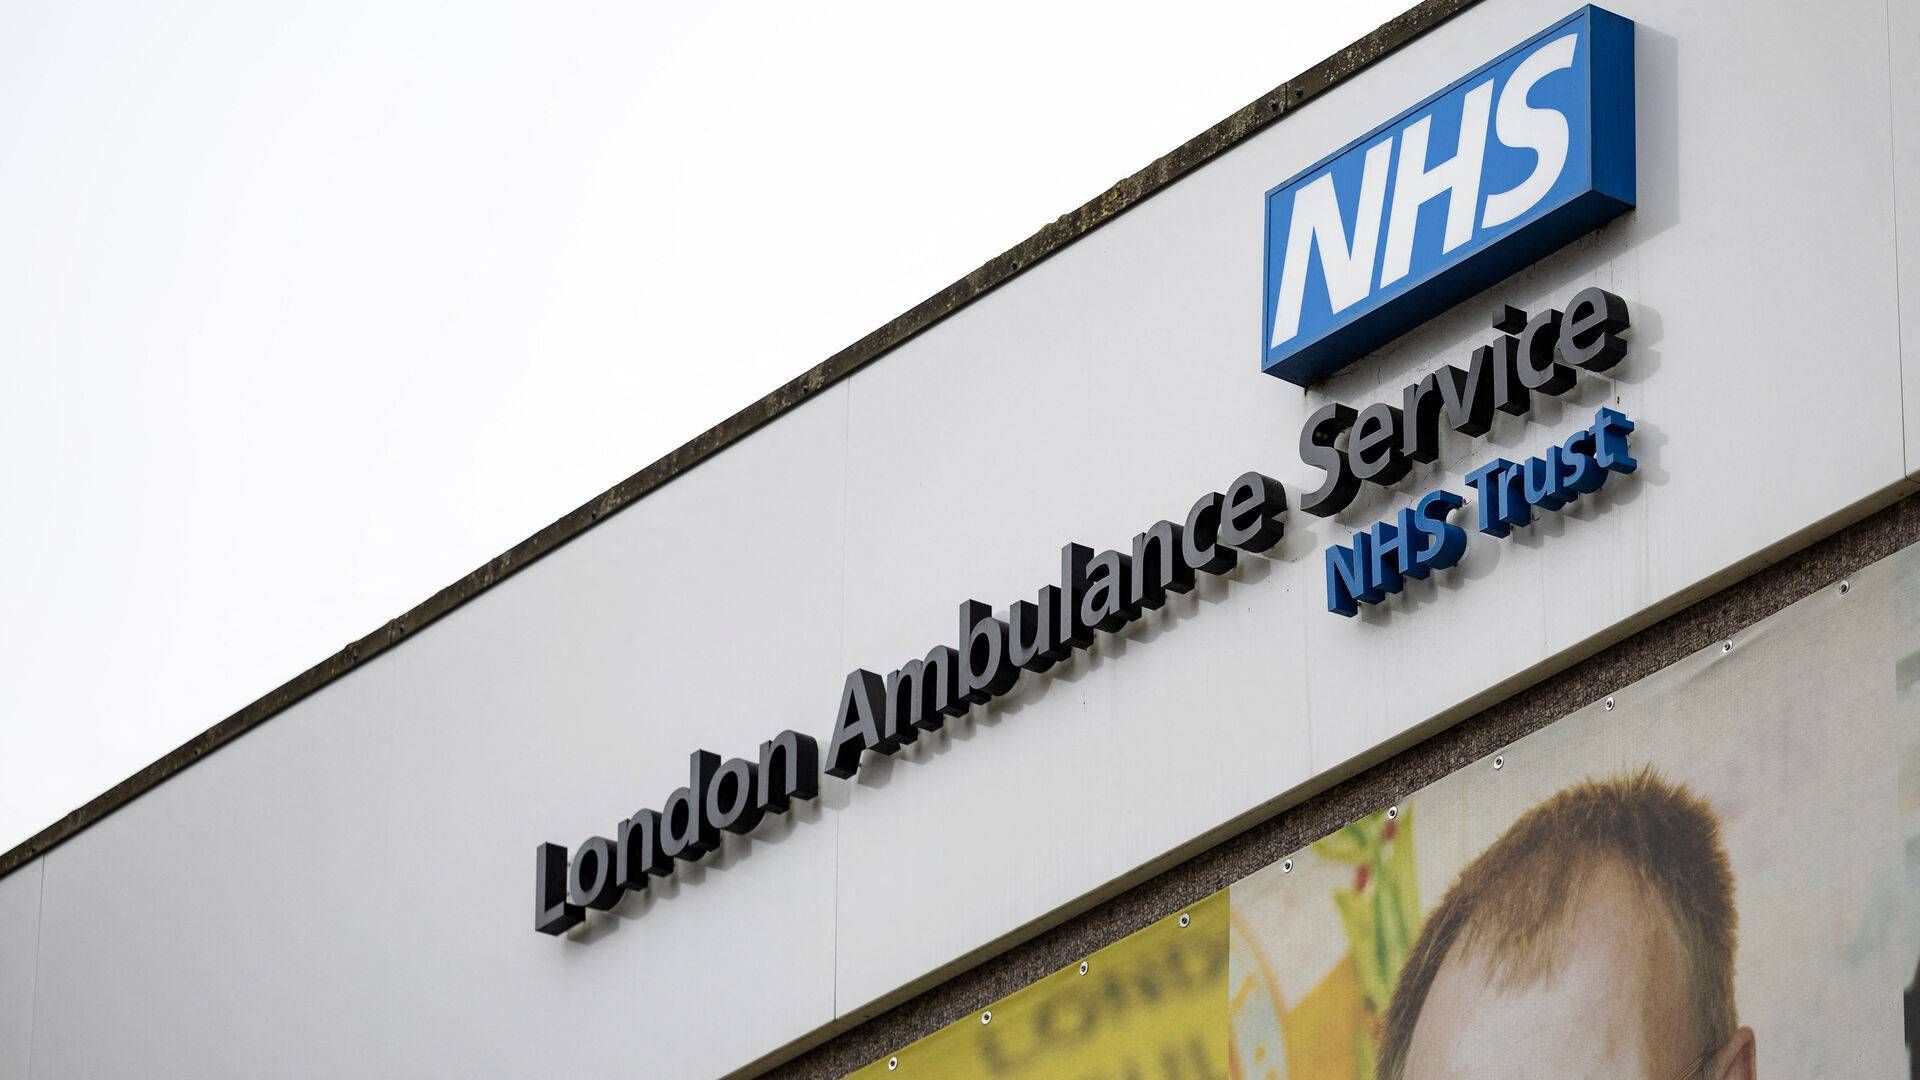 Several companies are unhappy with an NHS pricing scheme. | Photo: May James/Reuters/Ritzau Scanpix